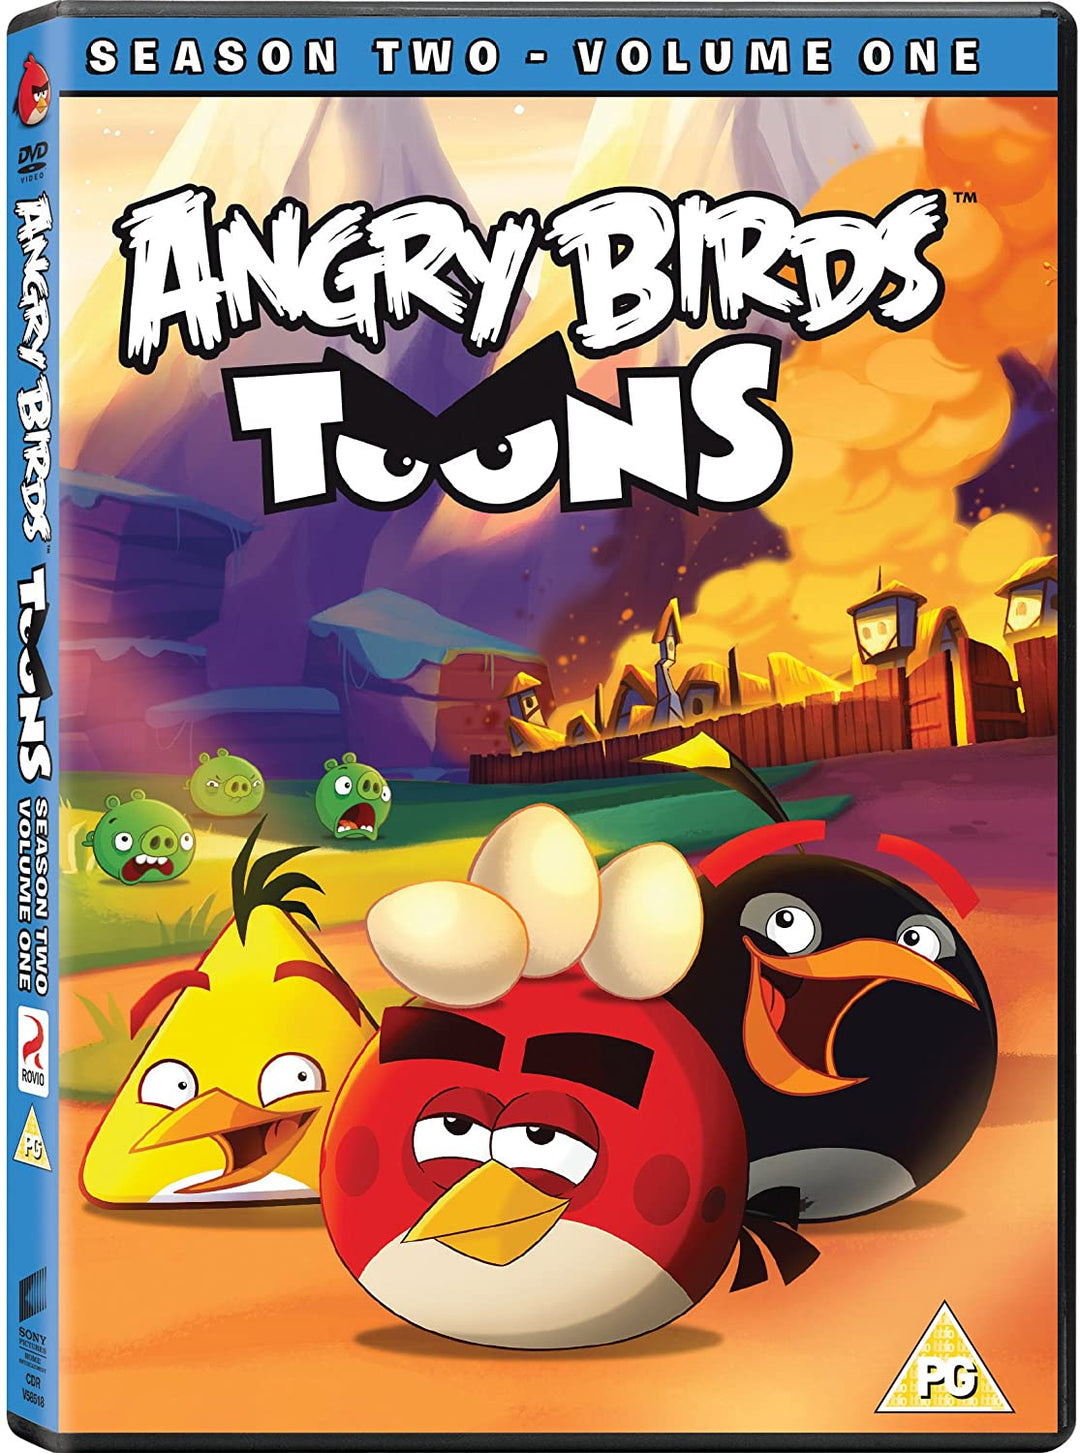 Angry Birds Toons: Season Two - Volume One